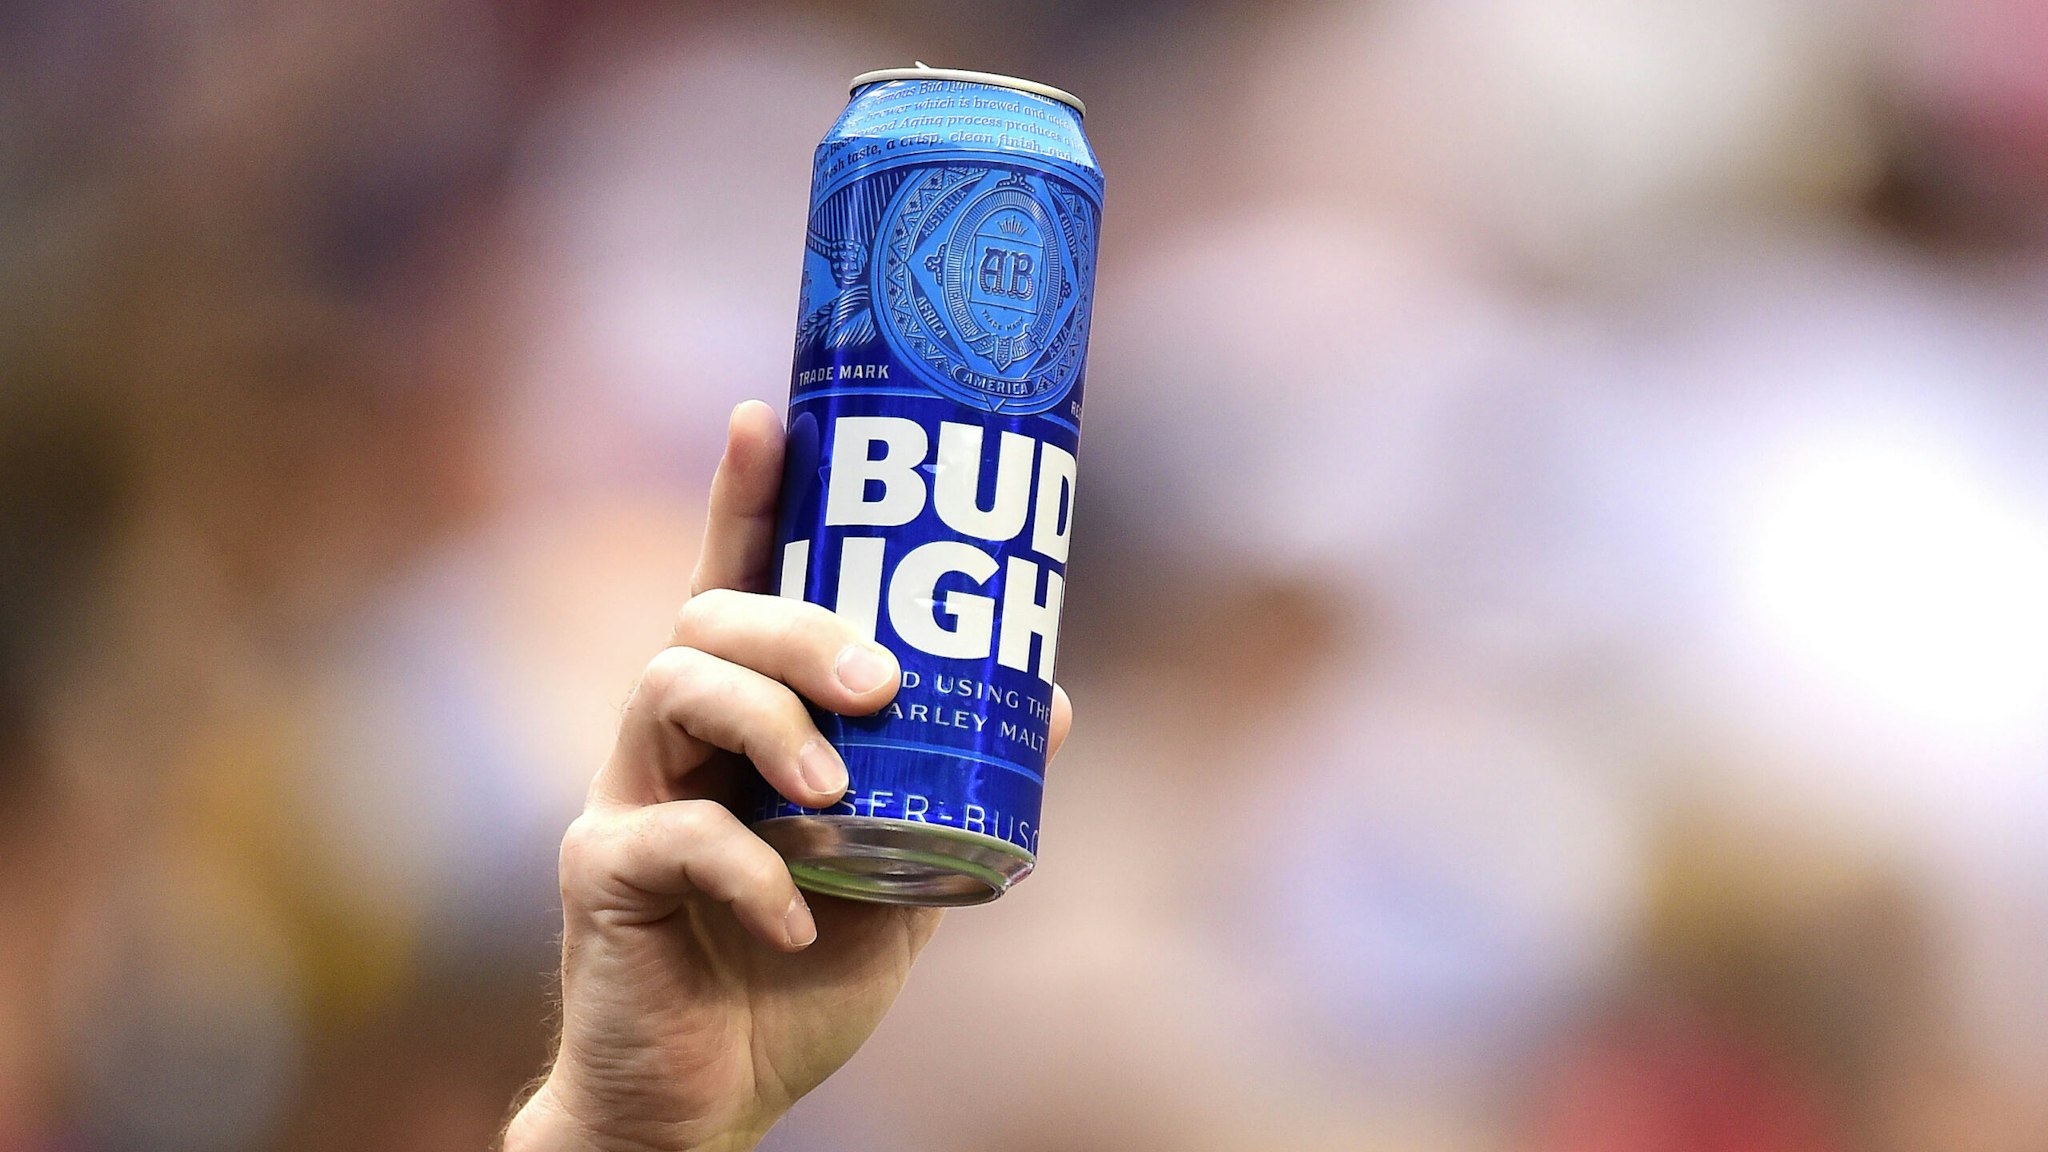 LANDOVER, MD - OCTOBER 06: A fan holds up a can of Bud Light during a game between the New England Patriots and Washington Redskins at FedExField on October 6, 2019 in Landover, Maryland.